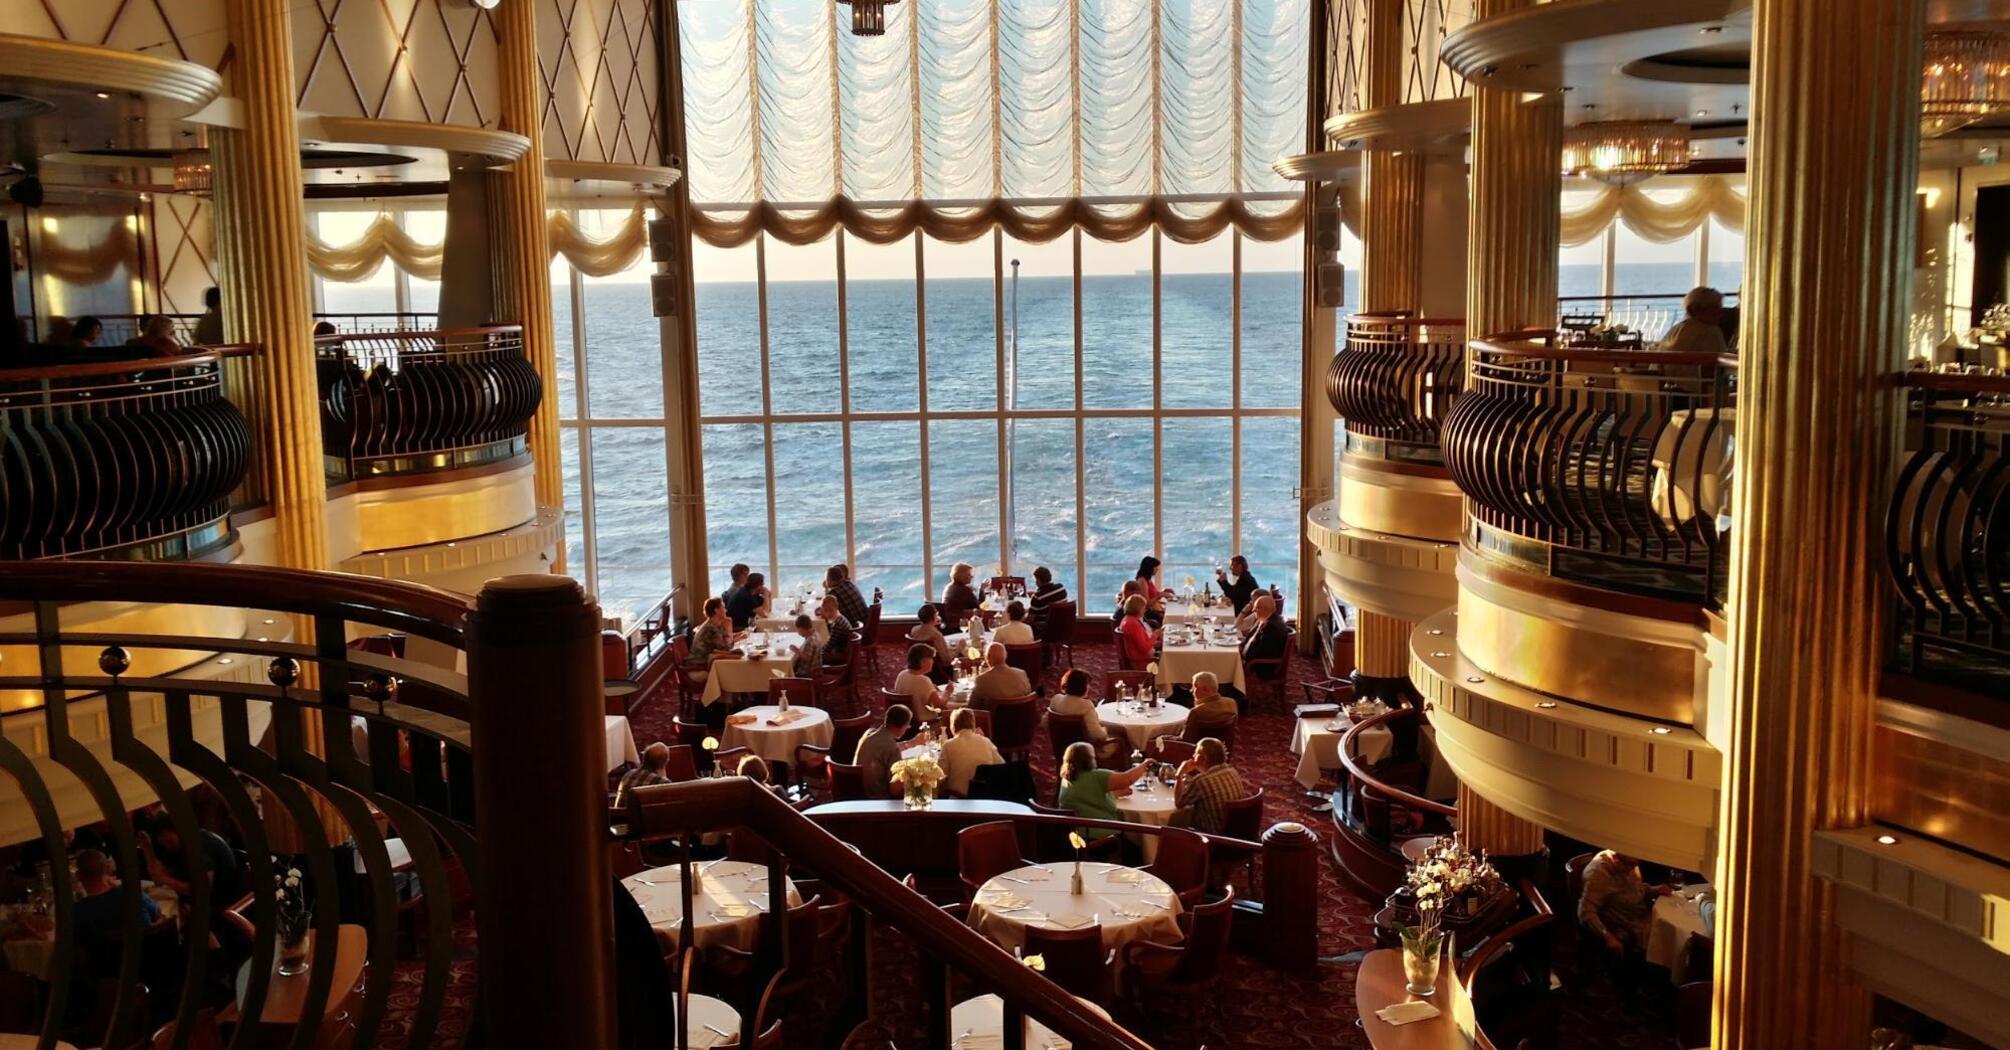 The elegant dining room on the cruise ship